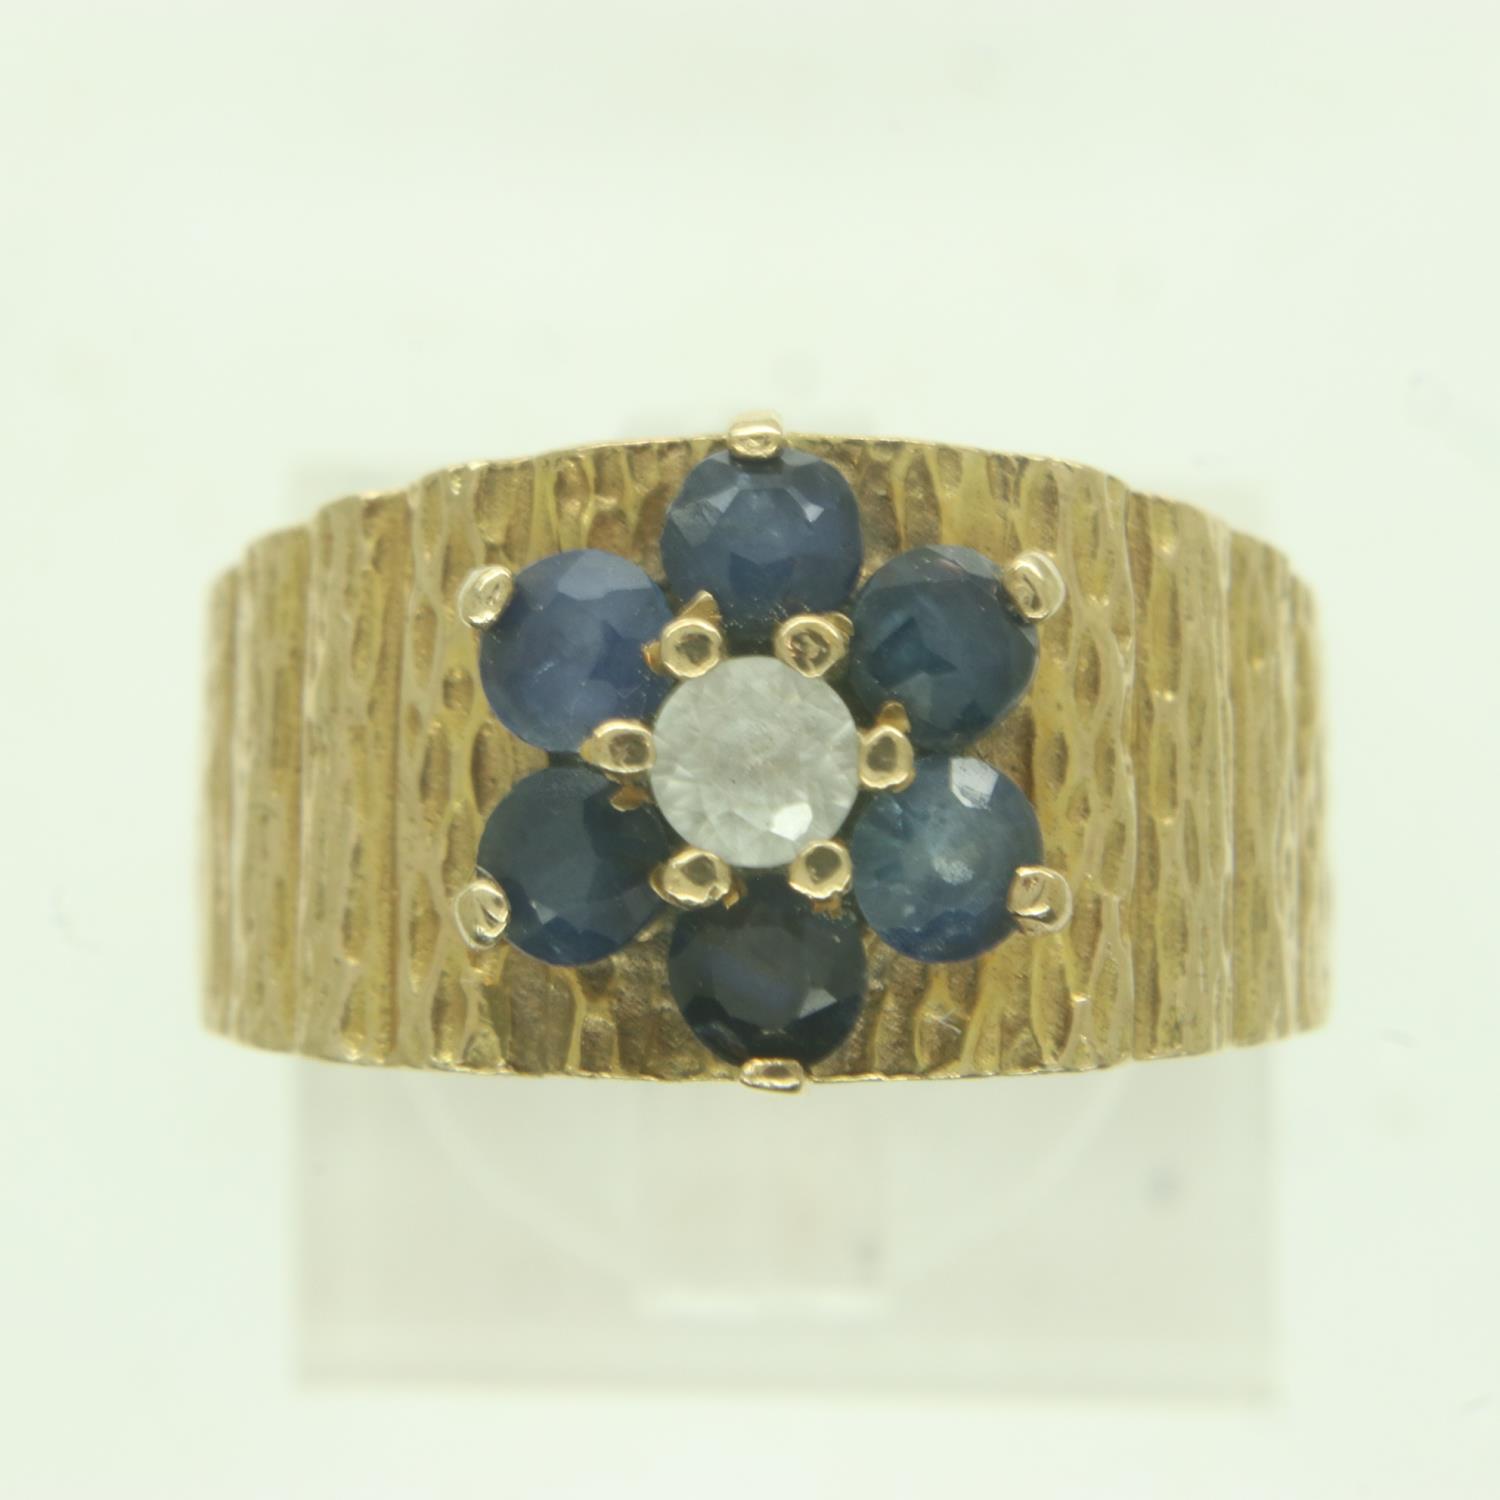 9ct gold ring set with diamond and sapphires, size N, 4.3g. UK P&P Group 0 (£6+VAT for the first lot